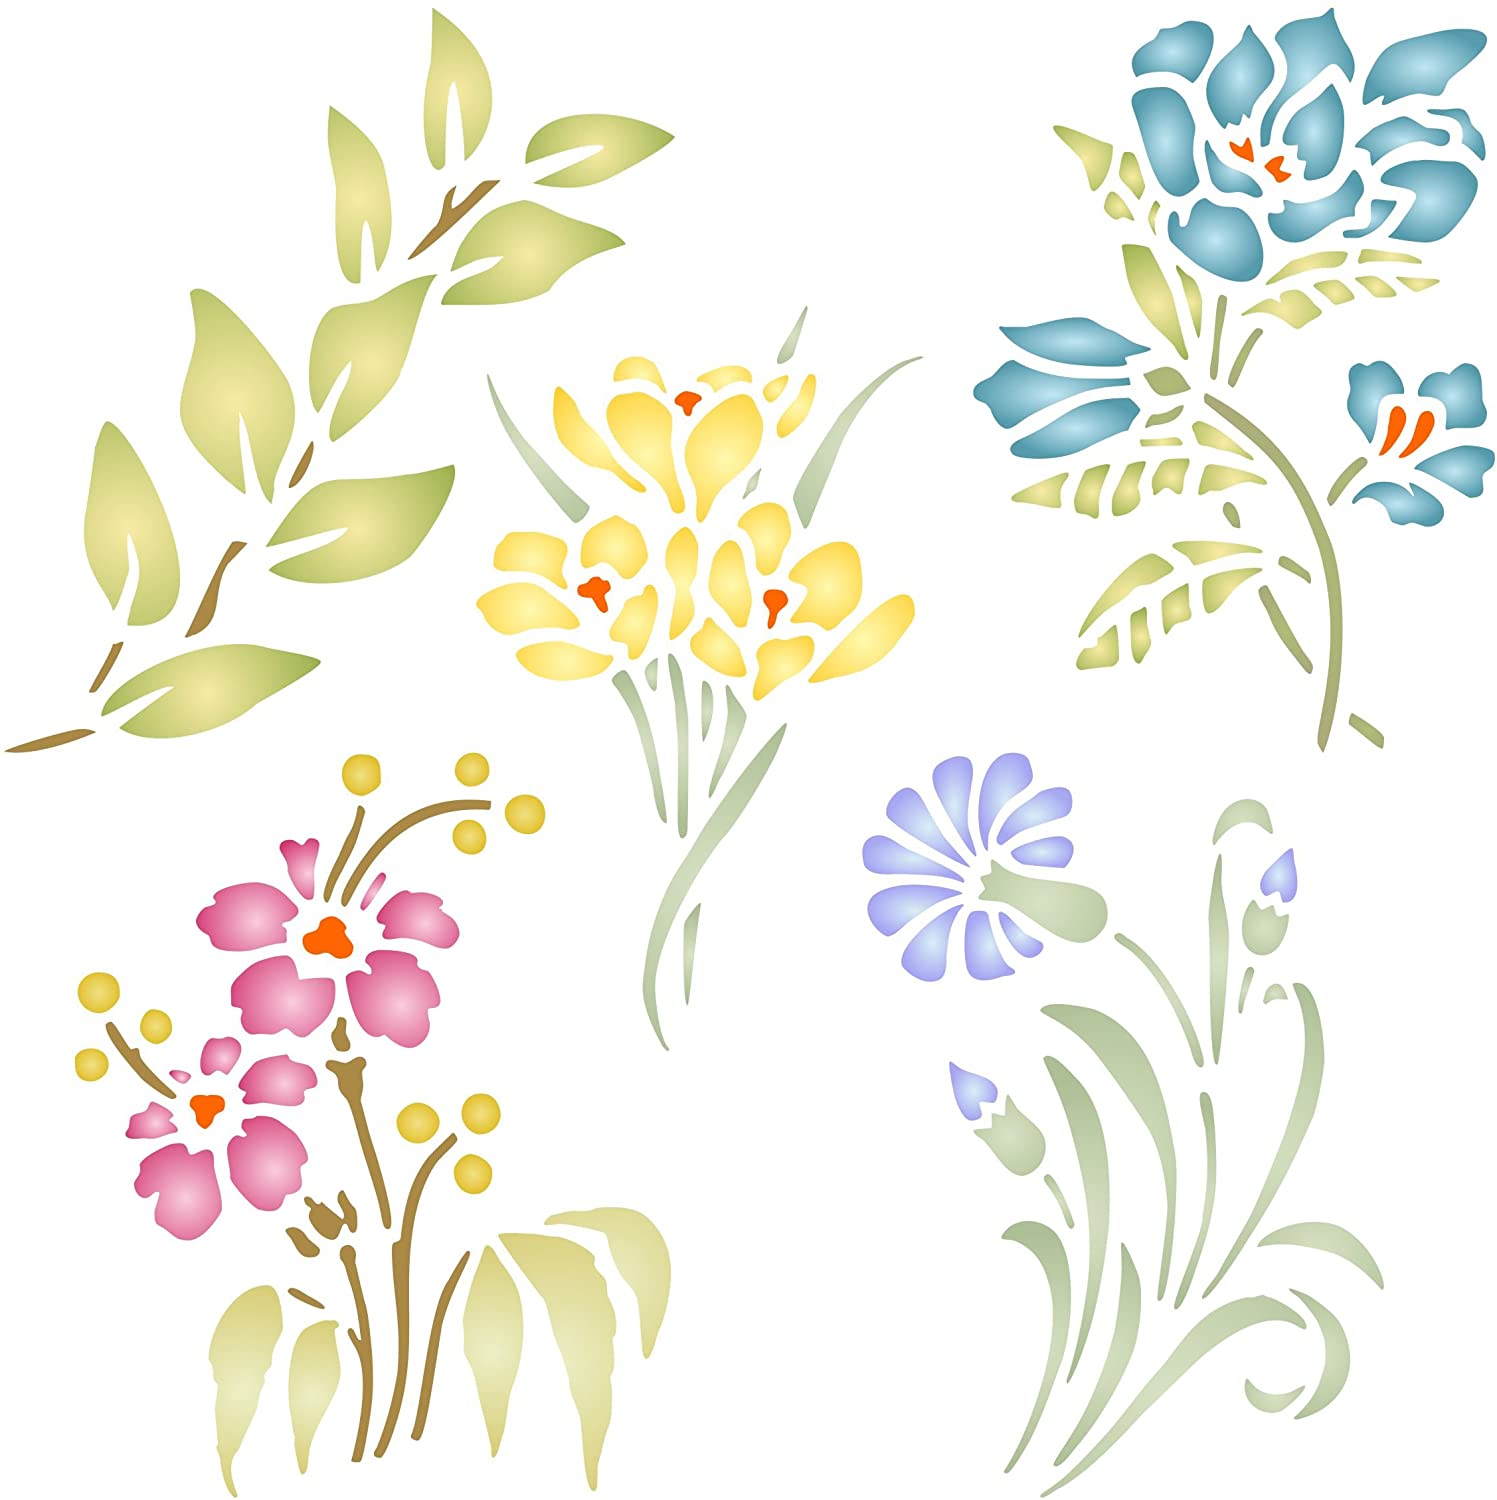 So many FLOWER STENCILS are available...